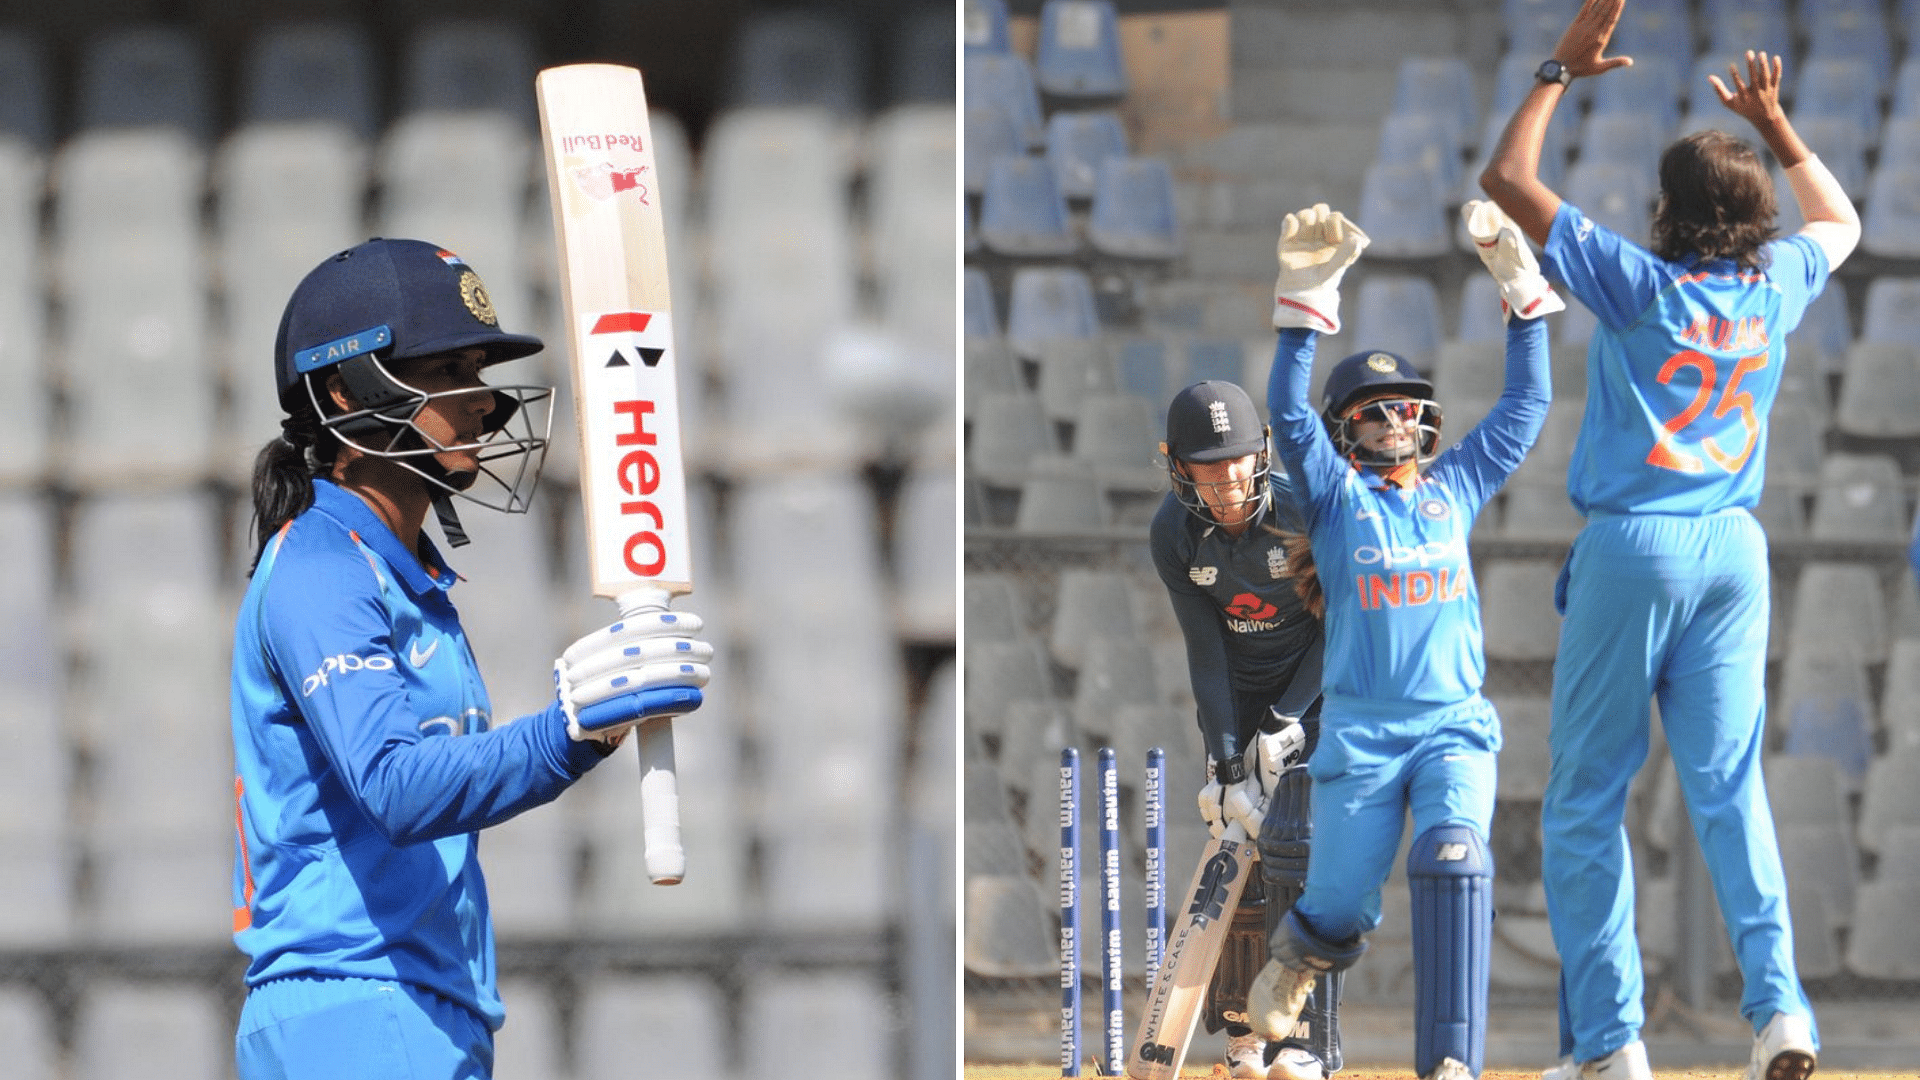 Smriti Mandhana (left) and Jhulan Goswami played starring roles as India clinched their ODI series against England with a 7-wicket win in the second game at Mumbai.